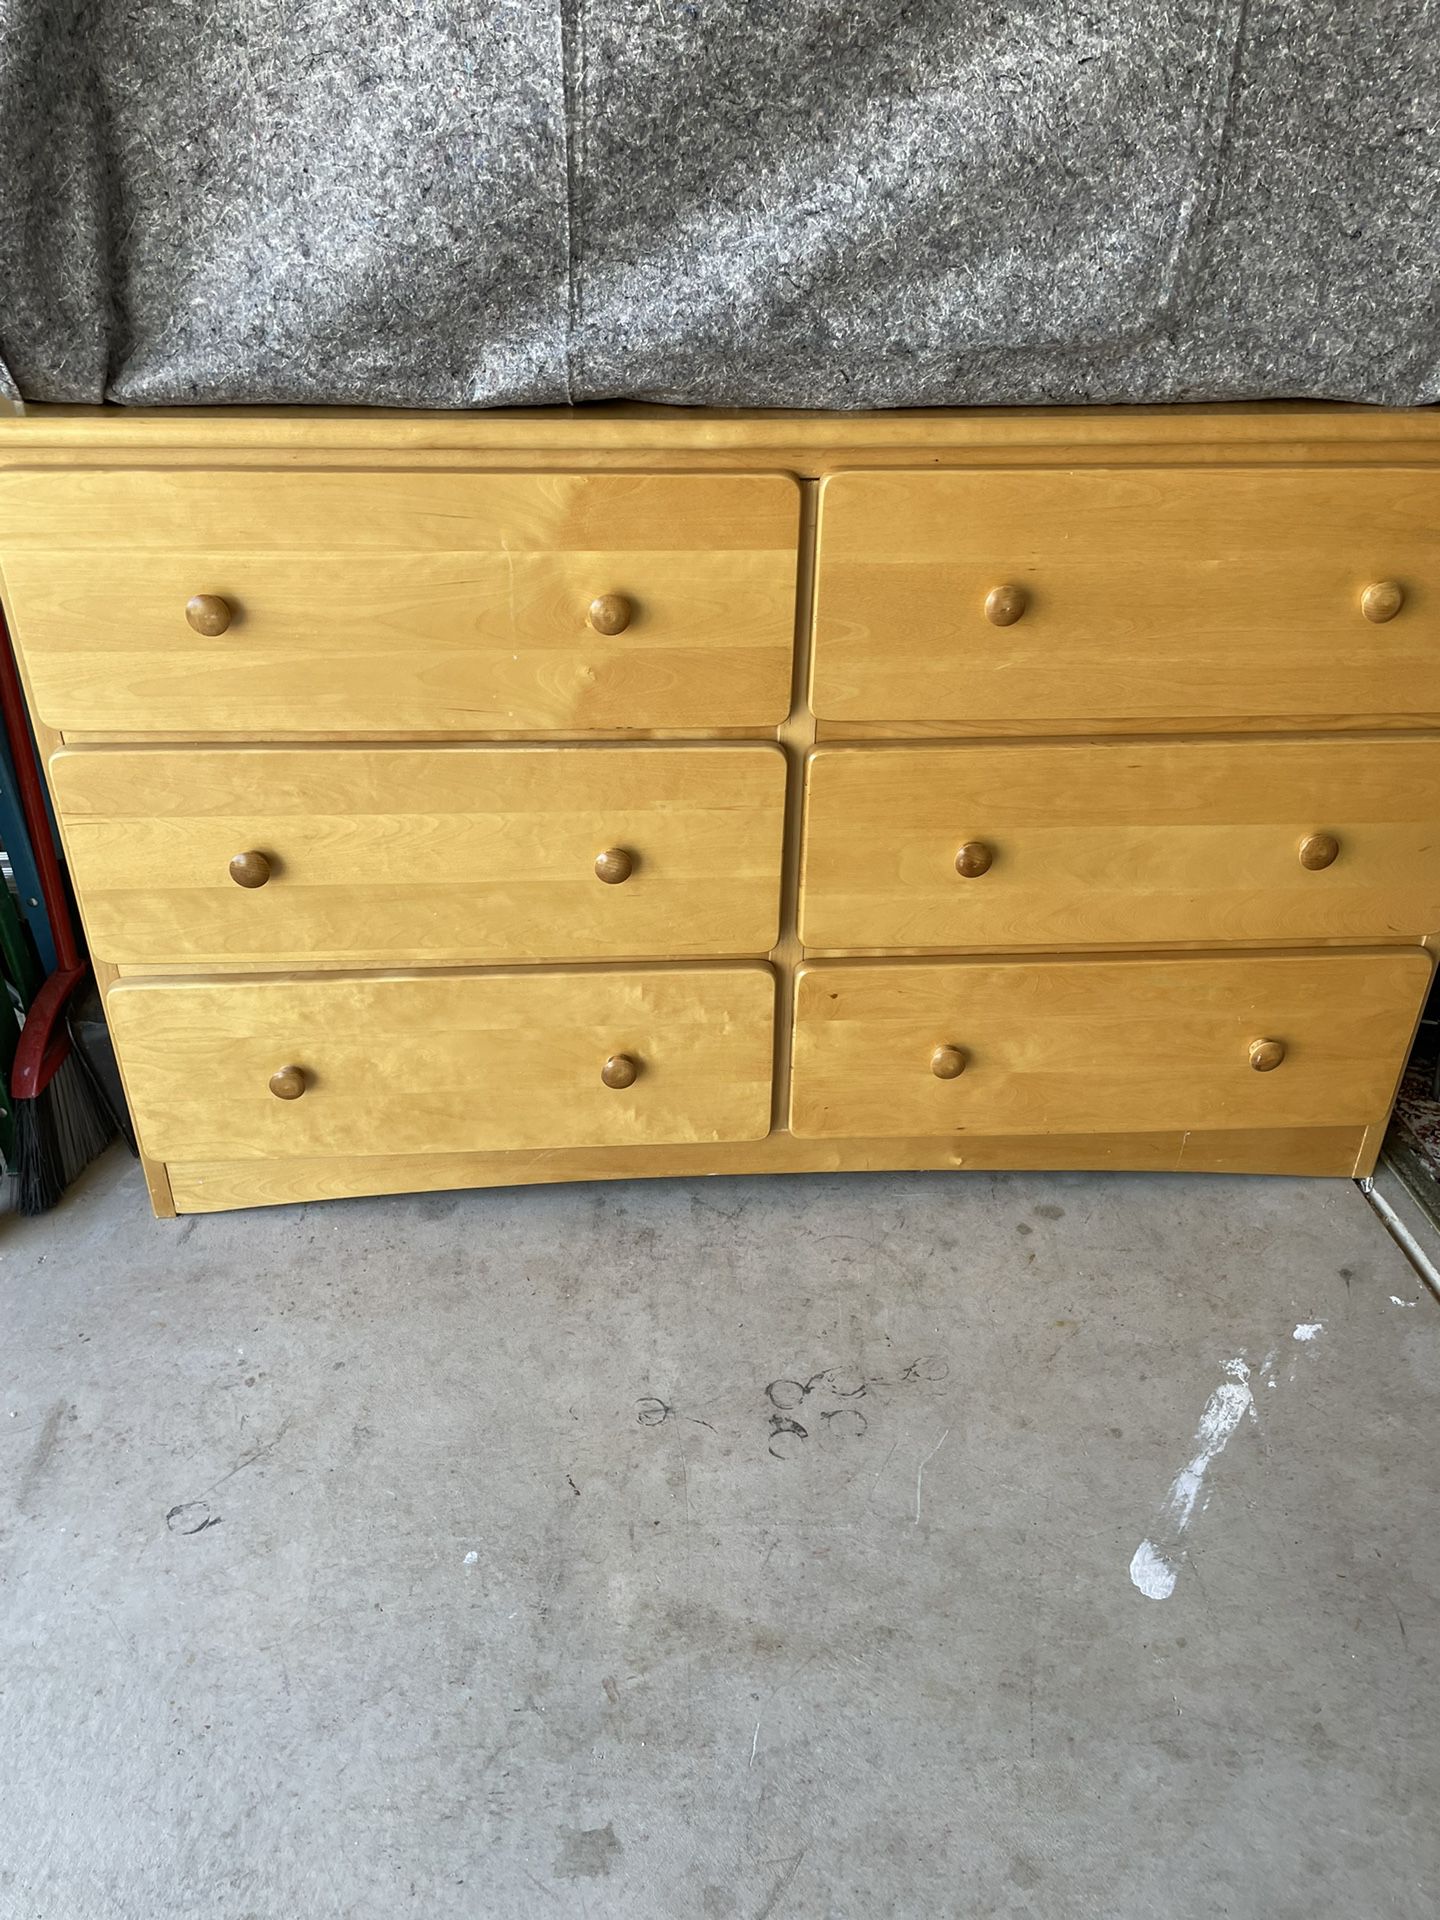 Very Good, Solid Wood, Dresser, And 2 Nightstands. at A Good Price.